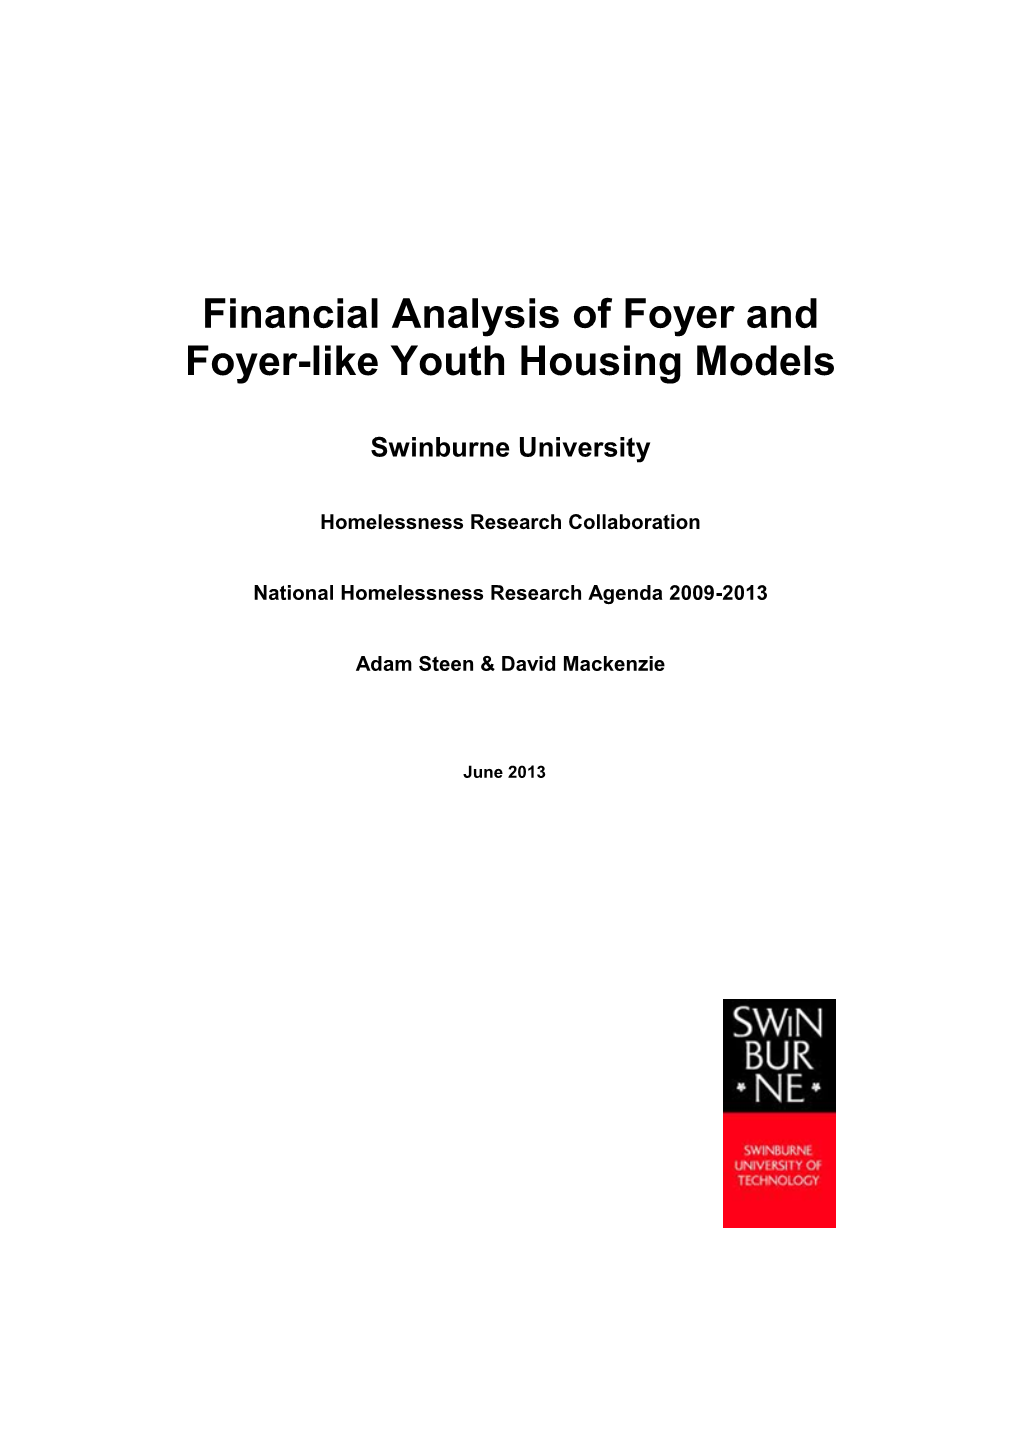 Financial Analysis of Foyer and Foyer-Like Youth Housing Models